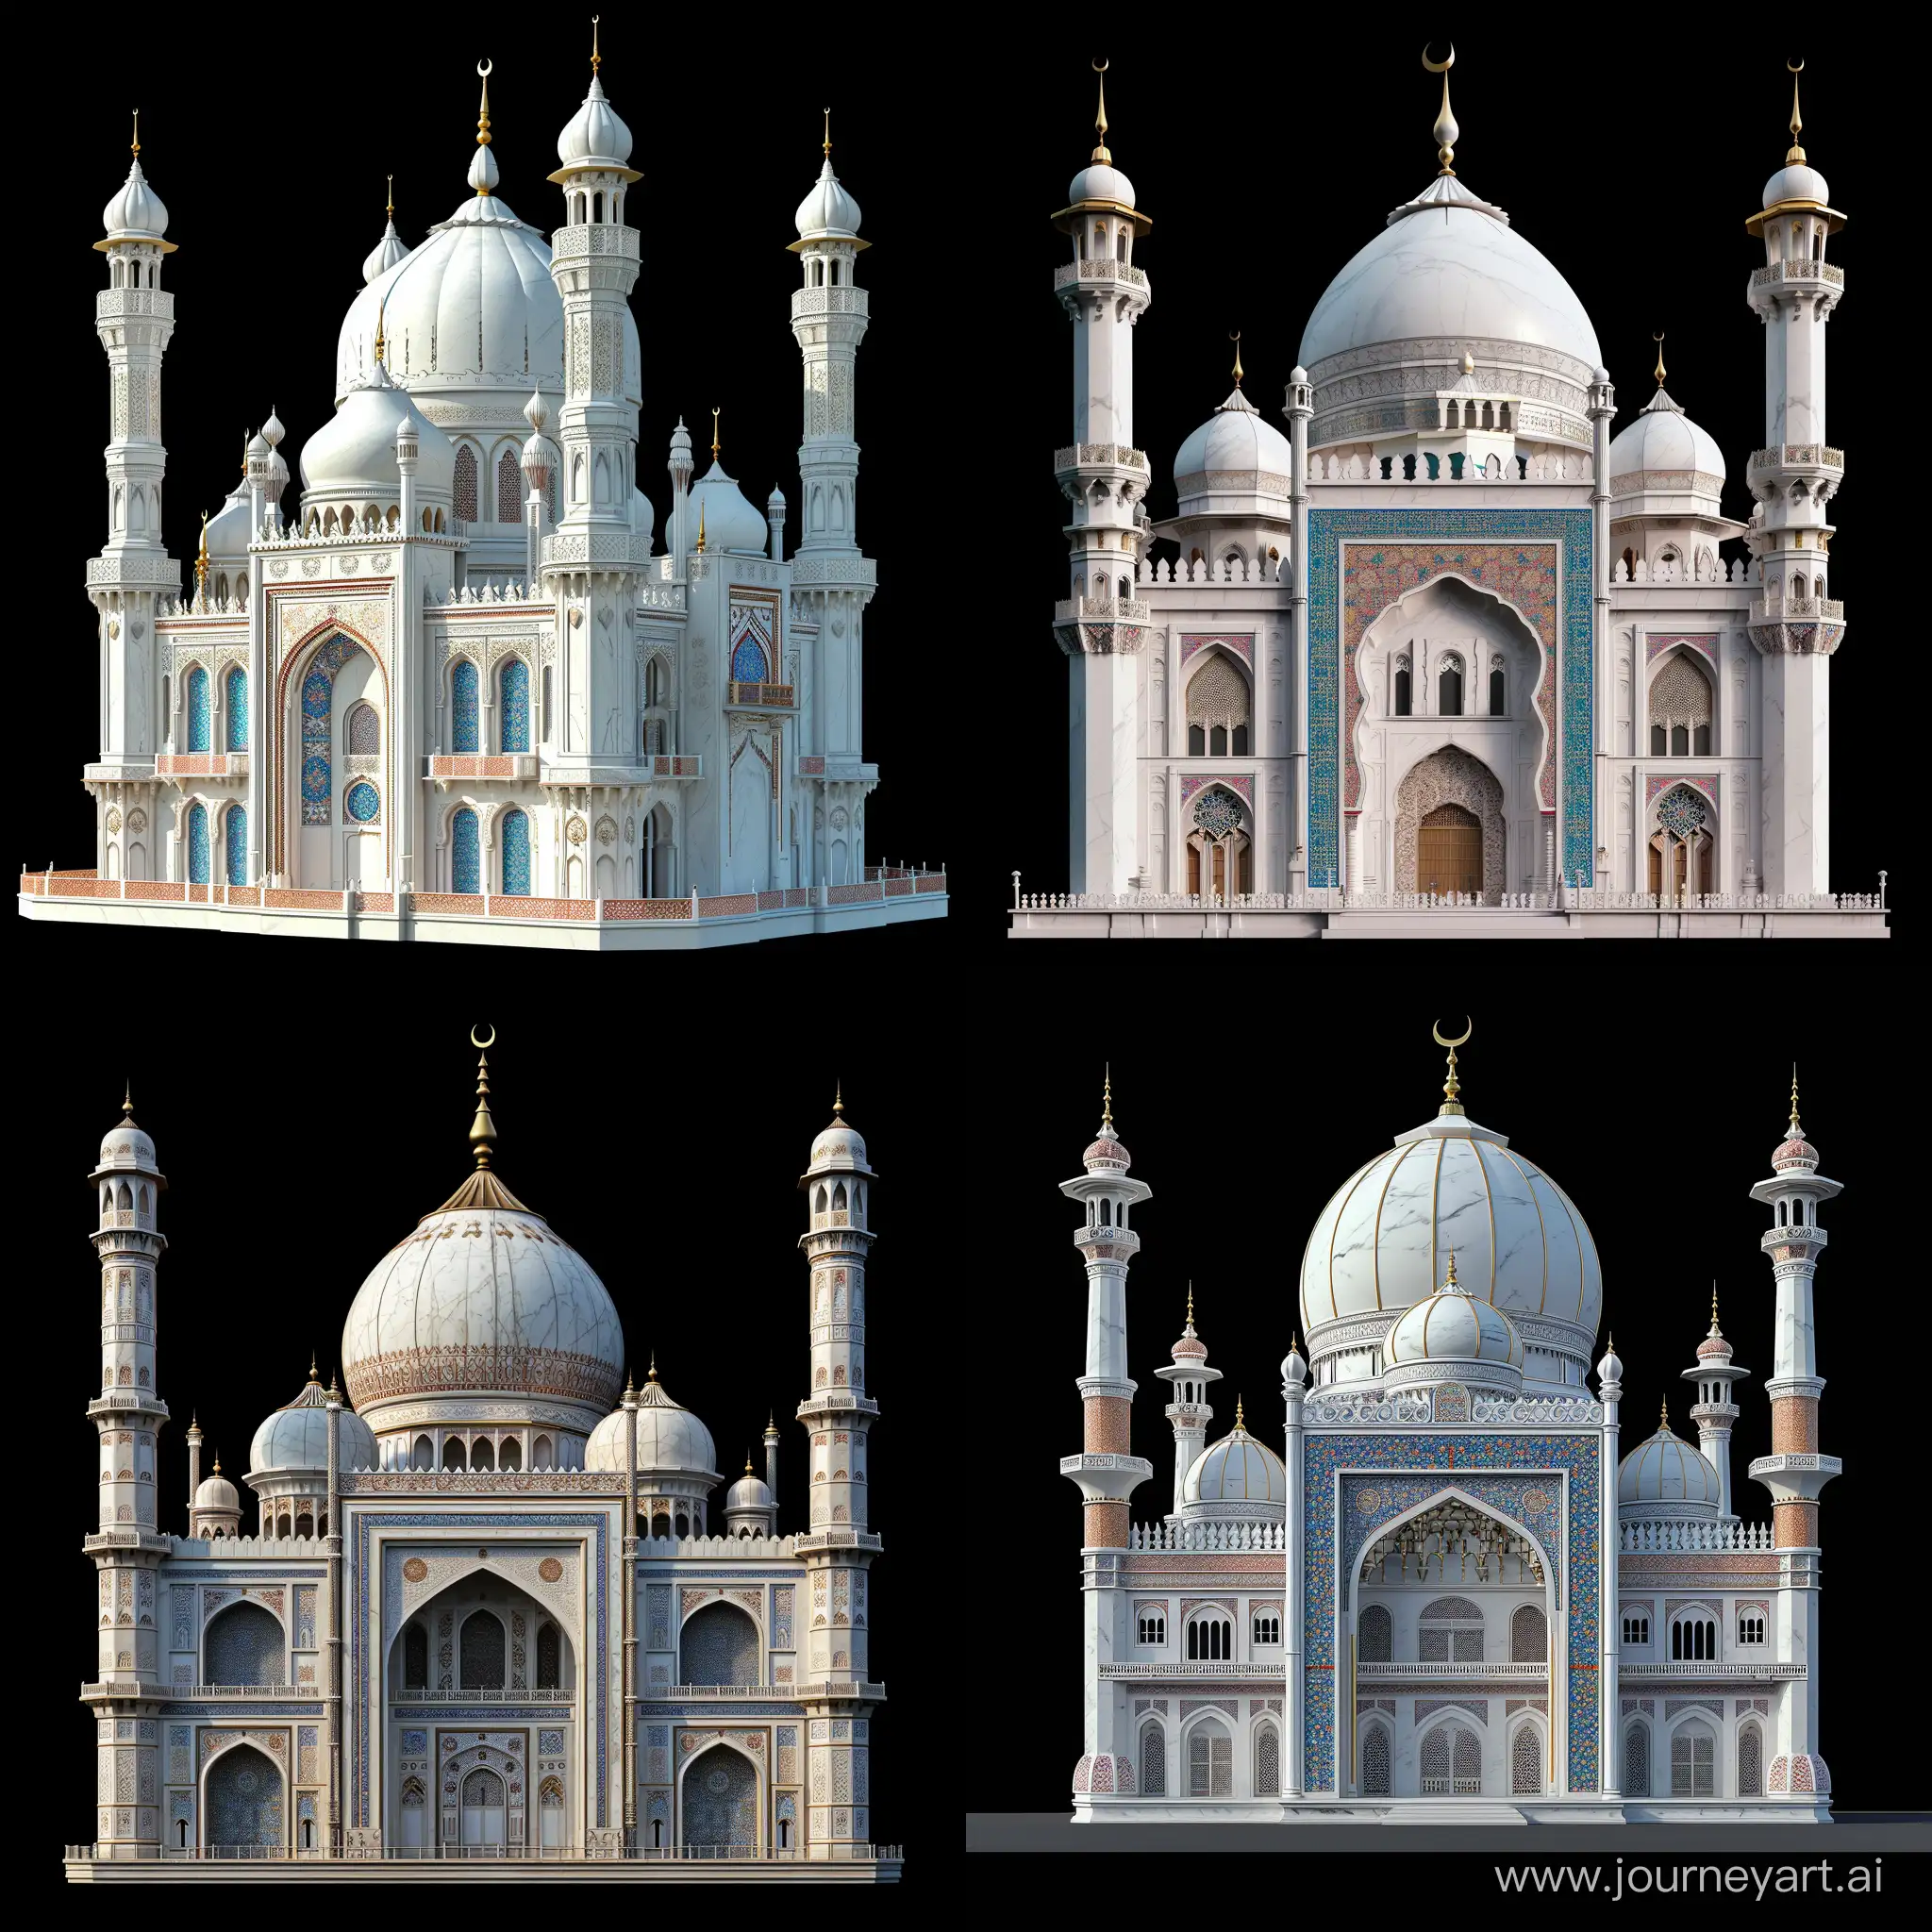 3d rendered: A Tall height large area multi storey Umayyad mosque, Mughal dome and thin decorative Mughal spires minarets, Curved chala style Bengal roof, Gurudwara balconies, Rajput architecture curved jharokha windows and Rajasthan chhatri, Modern White marbled facade, blue red finely thin floral Persian tiles motifs, shiny gold finial and golden arabesque ornaments, black background, full view, front view, symmetric --v 6